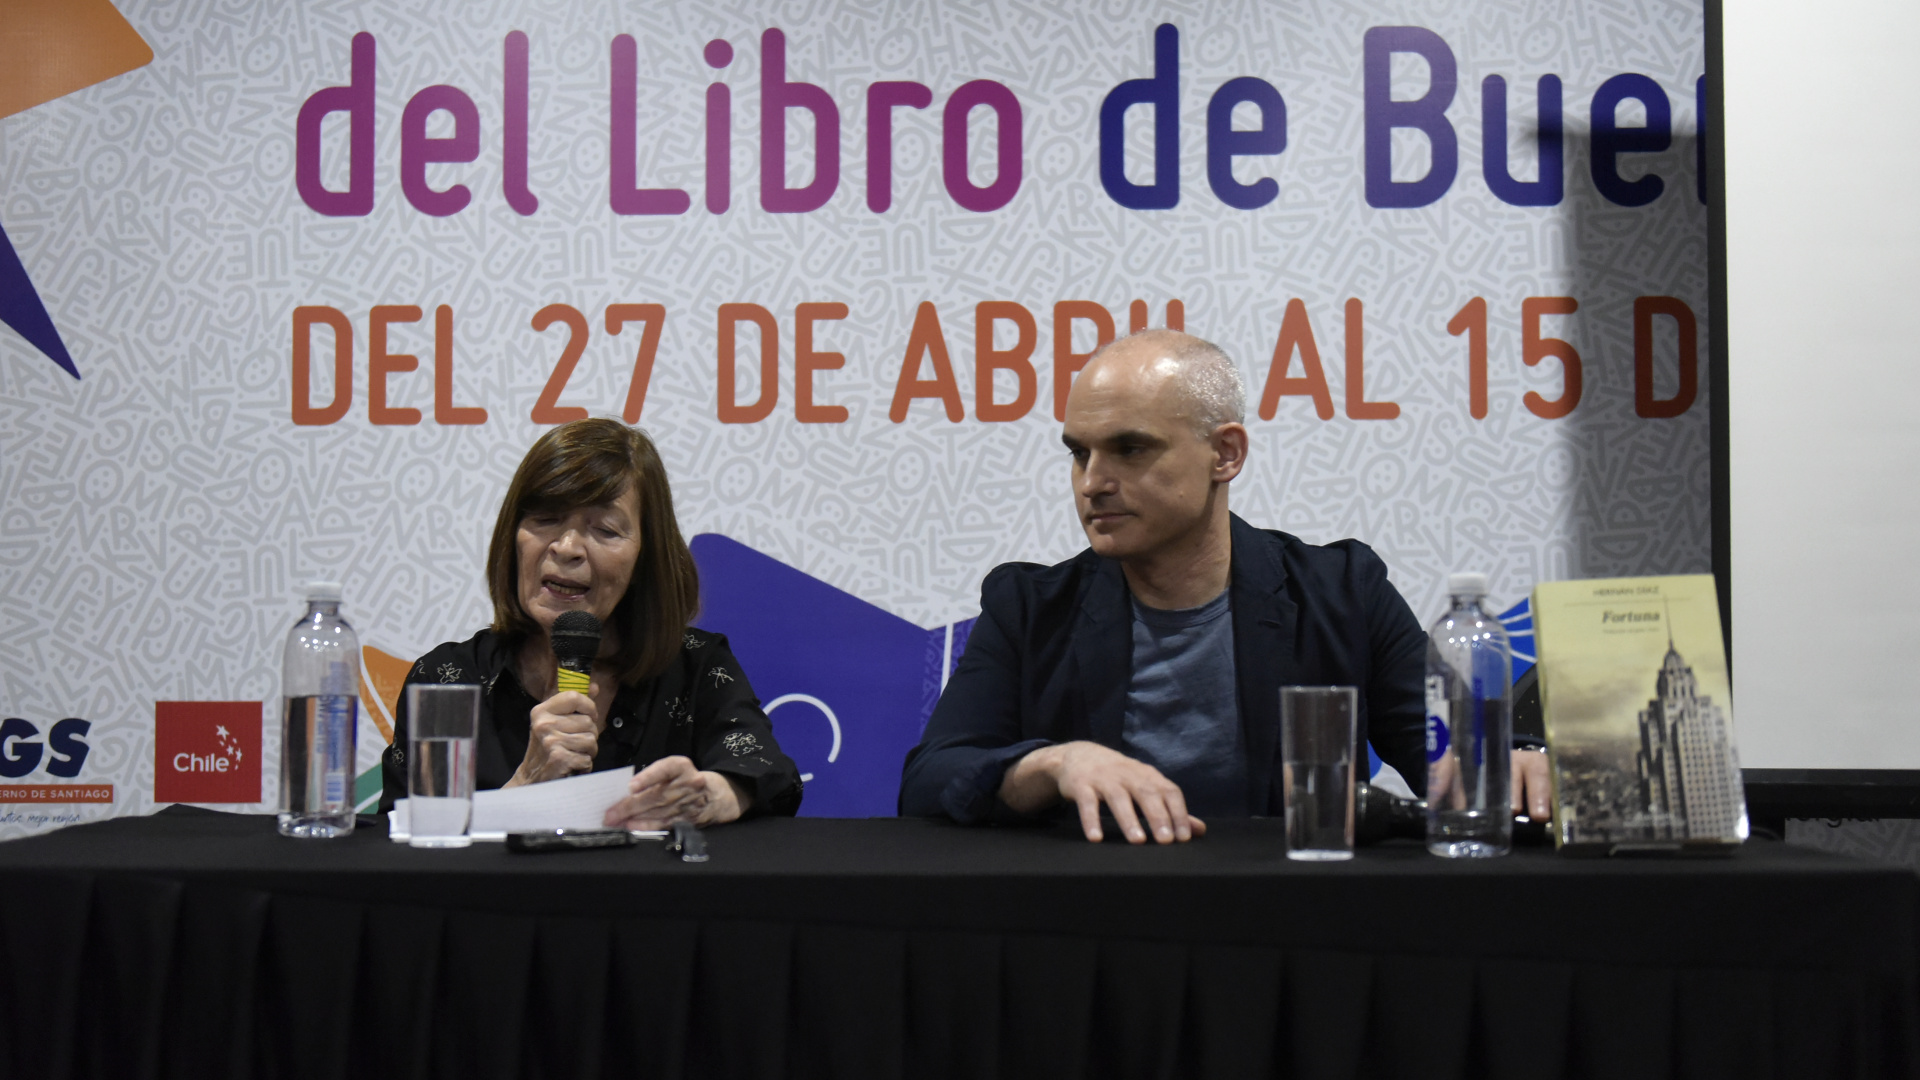 A few days ago, the author of Fortuna presented his novel at the Book Fair with Graciela Speranza.  (Gustavo Gavotti)